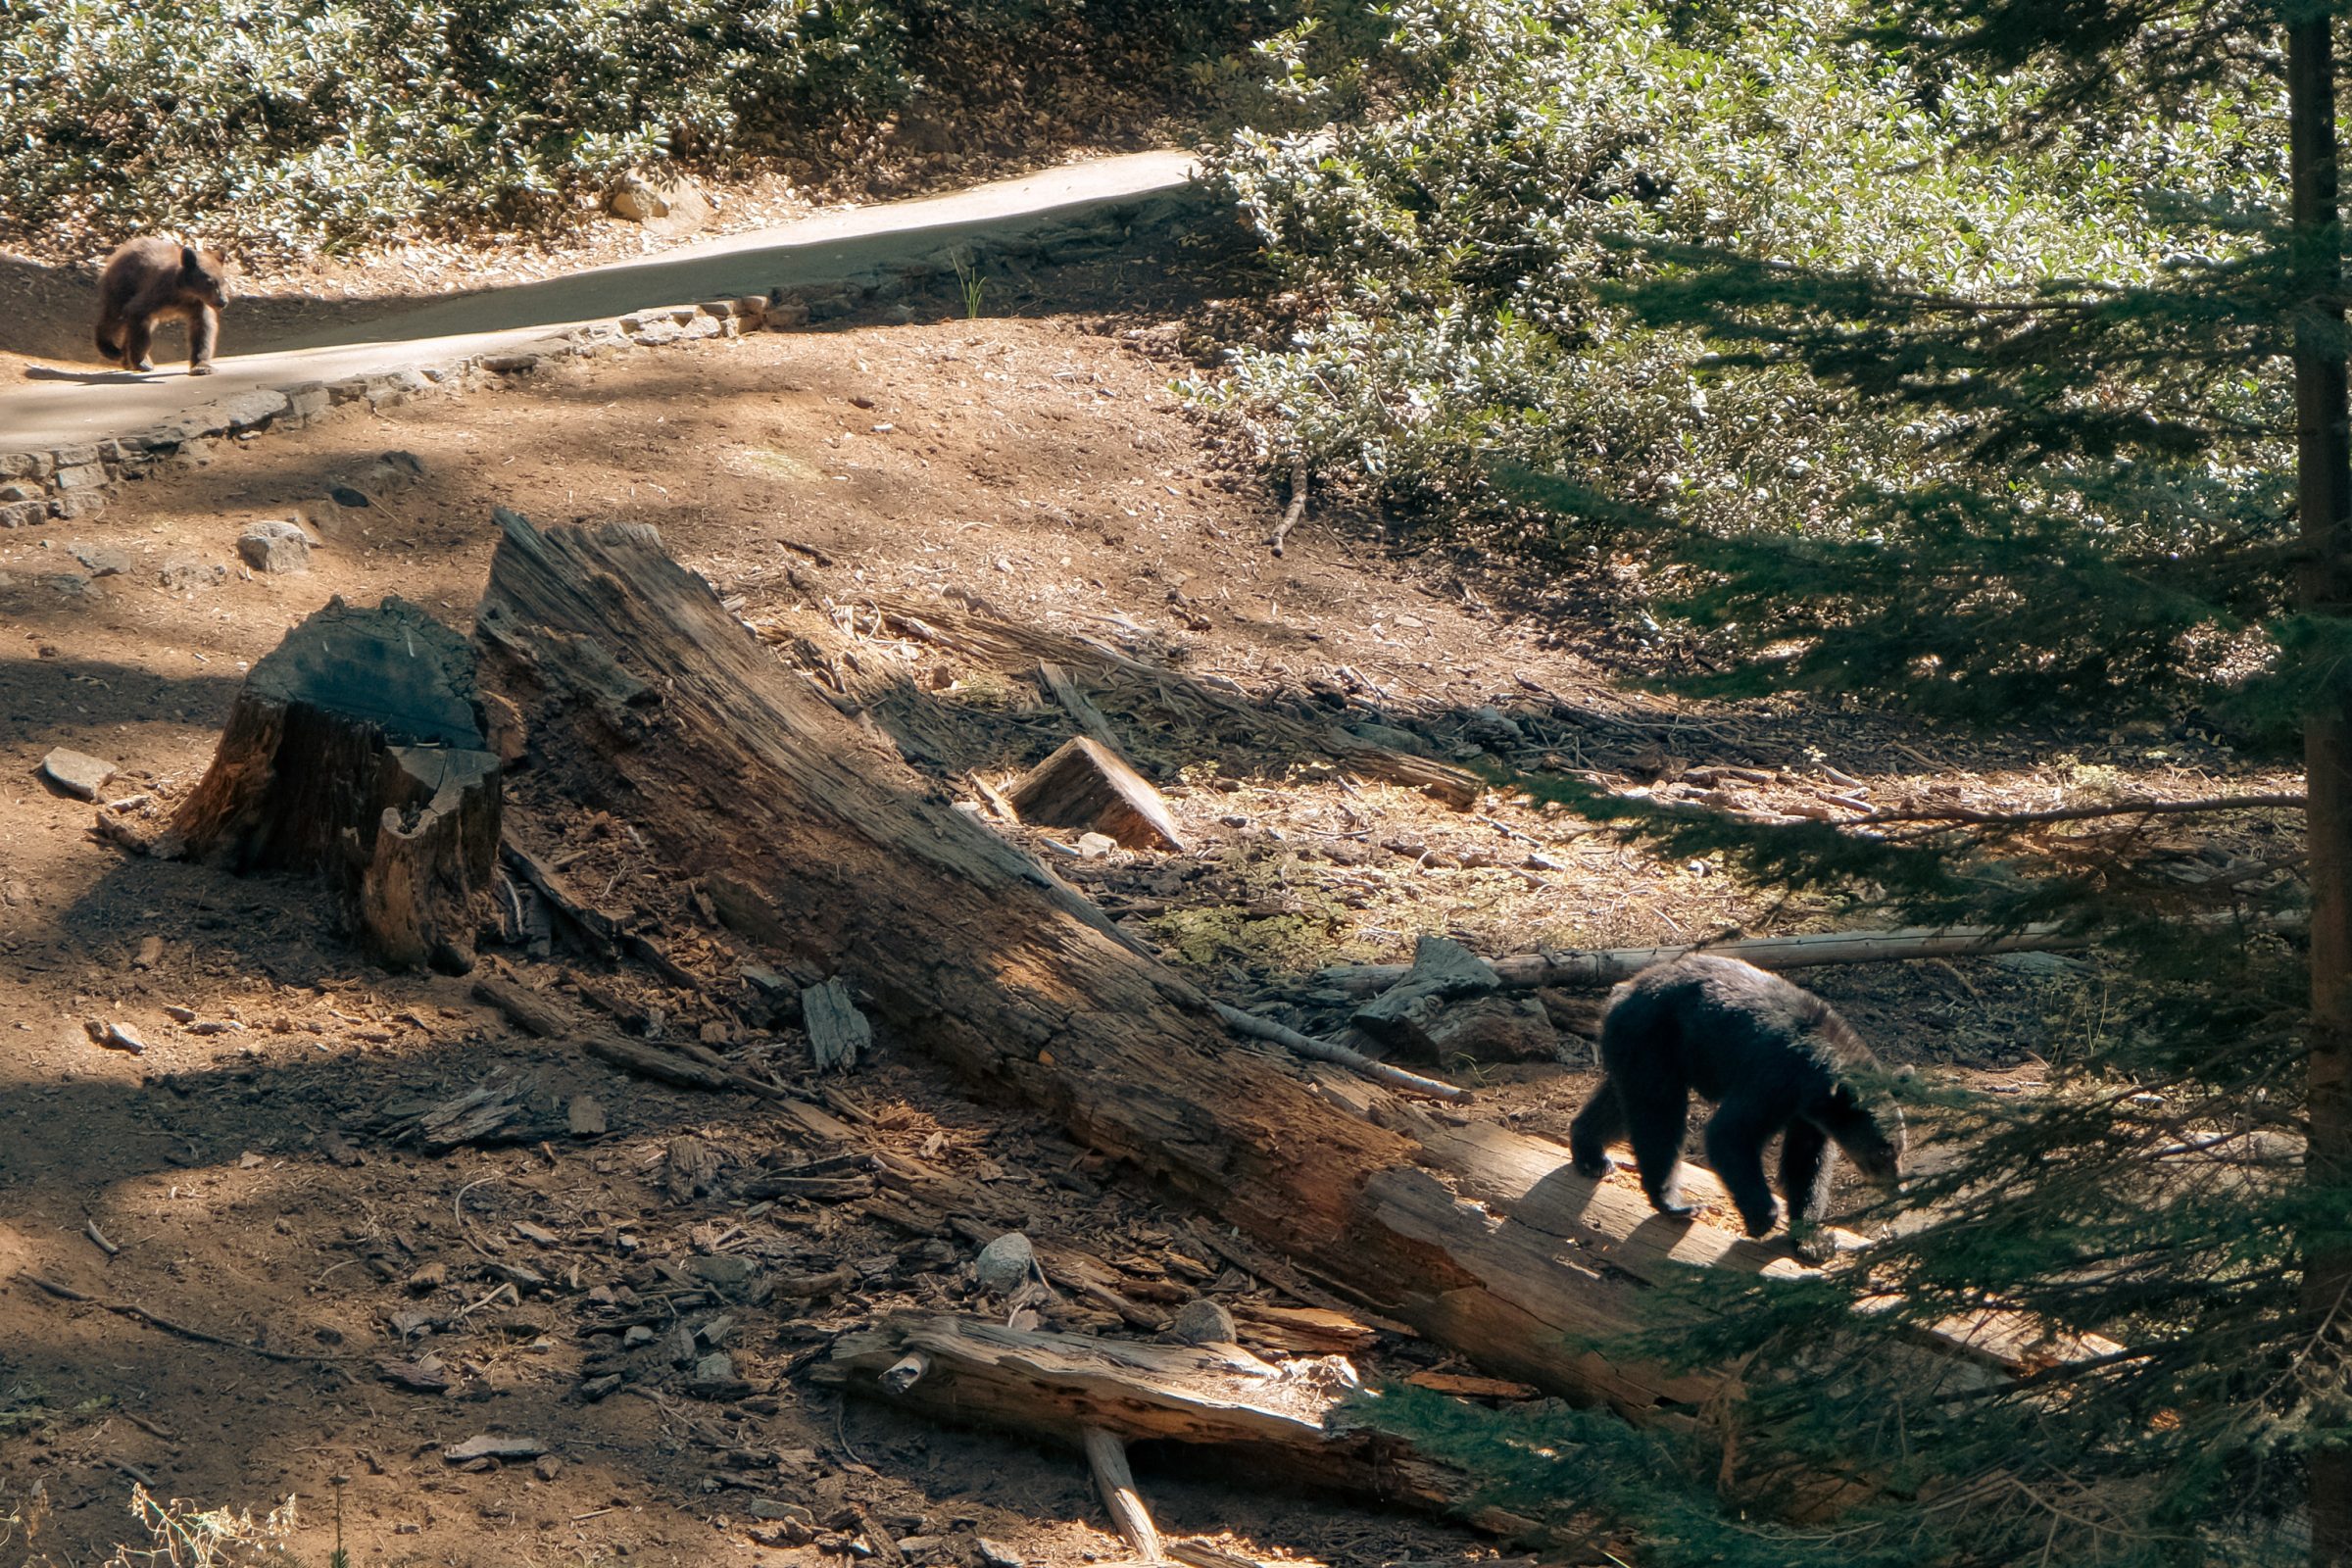 Bears in the park | Tips for Sequoia National Park